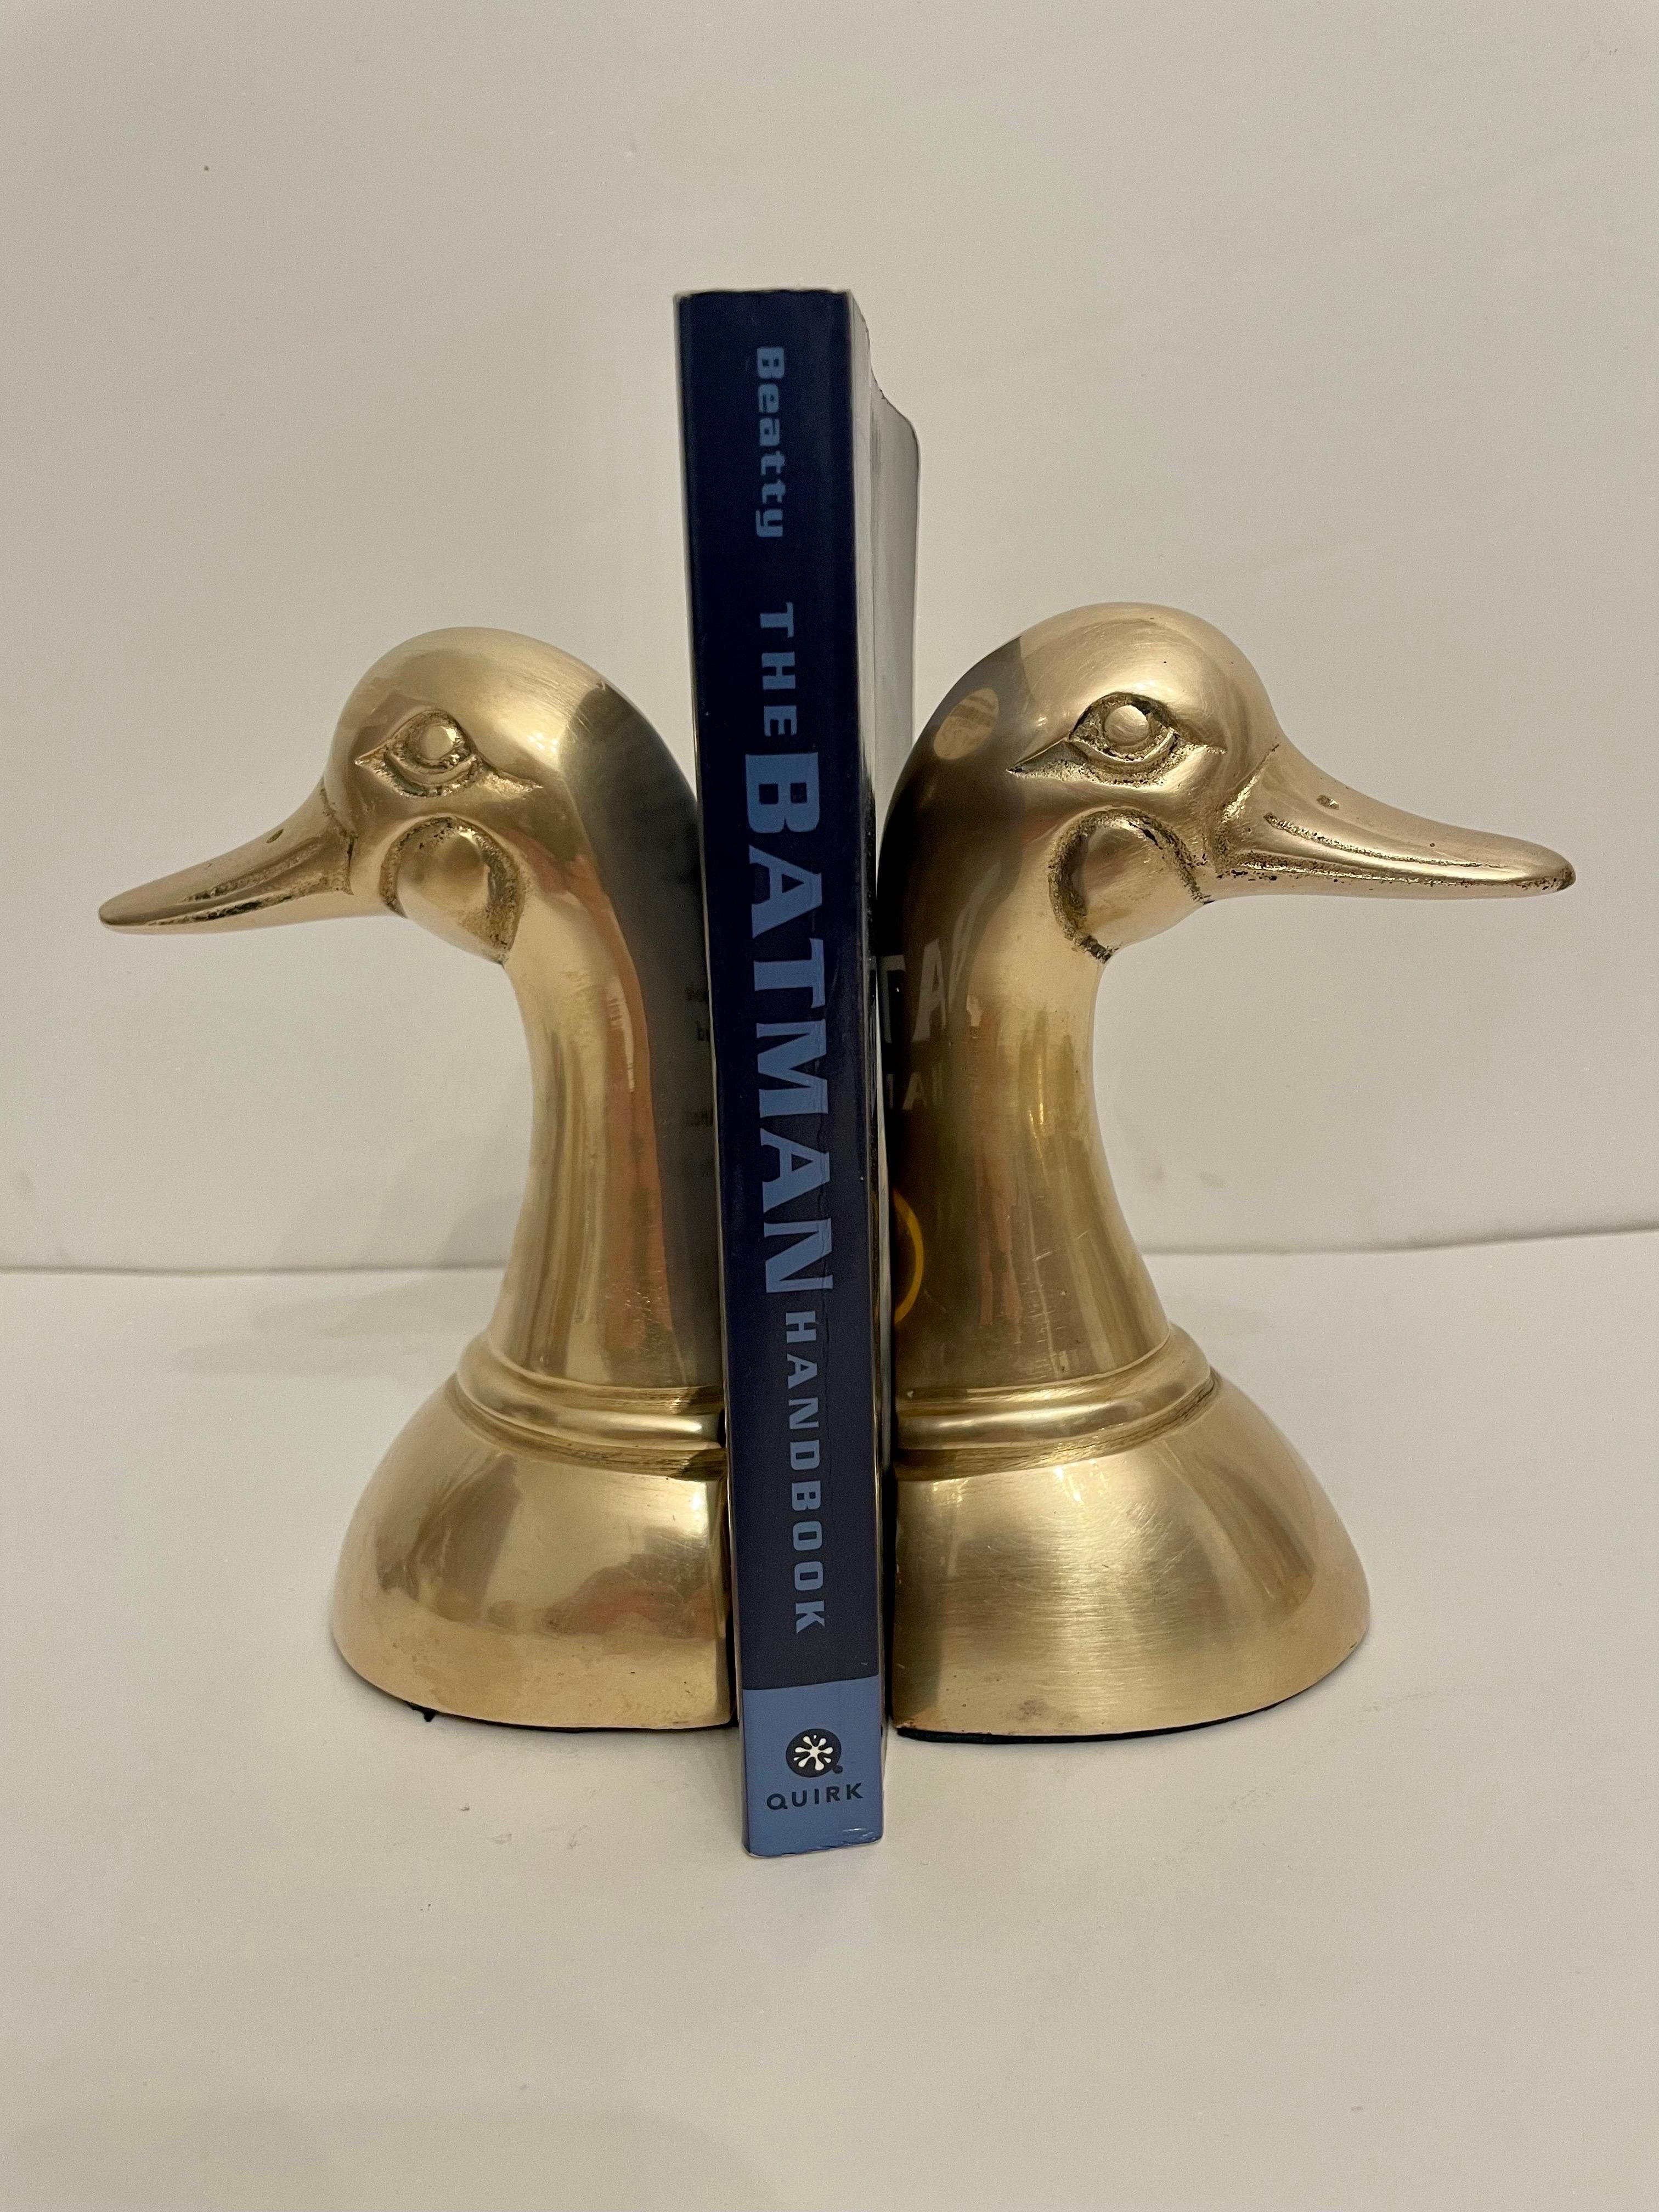 Vintage brass Duck bookends. Larger size. Good condition. Has nice size to hold a stack of books. Great for your desk or bookshelf. Any dark areas are reflection only.